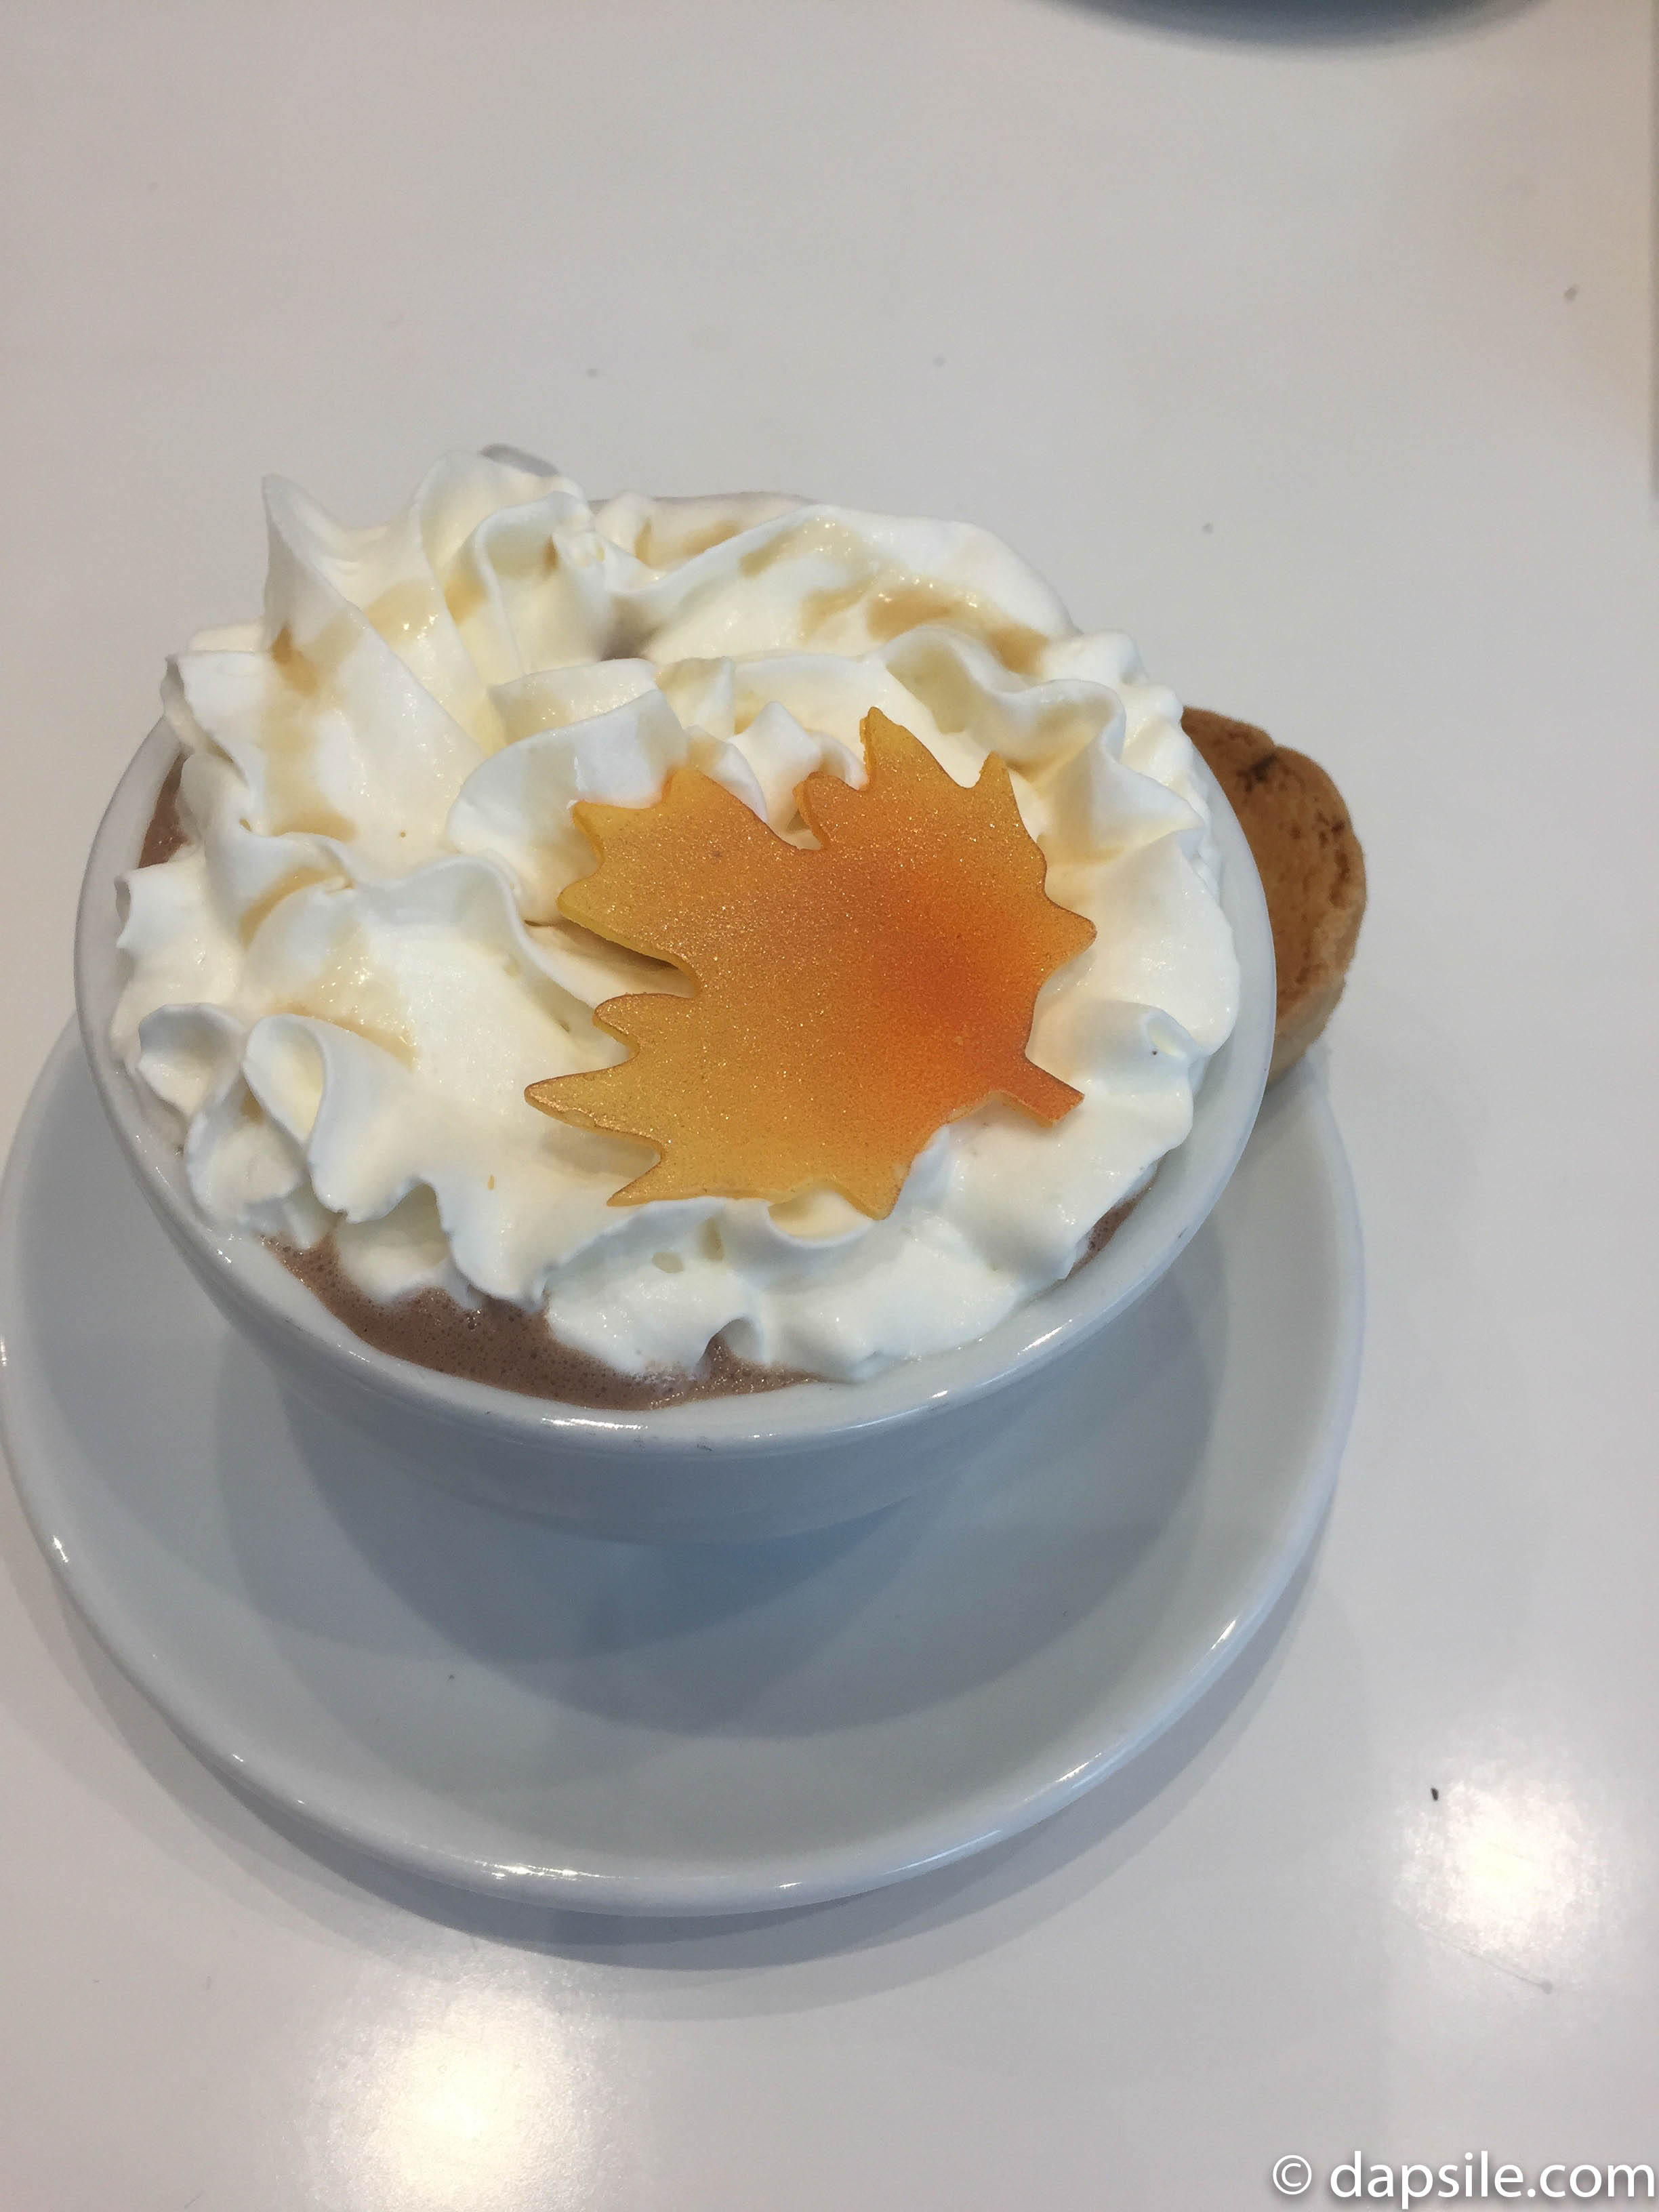 Mon Paris Patisserie Canadian Comfort from the Hot Chocolate Festival 2019